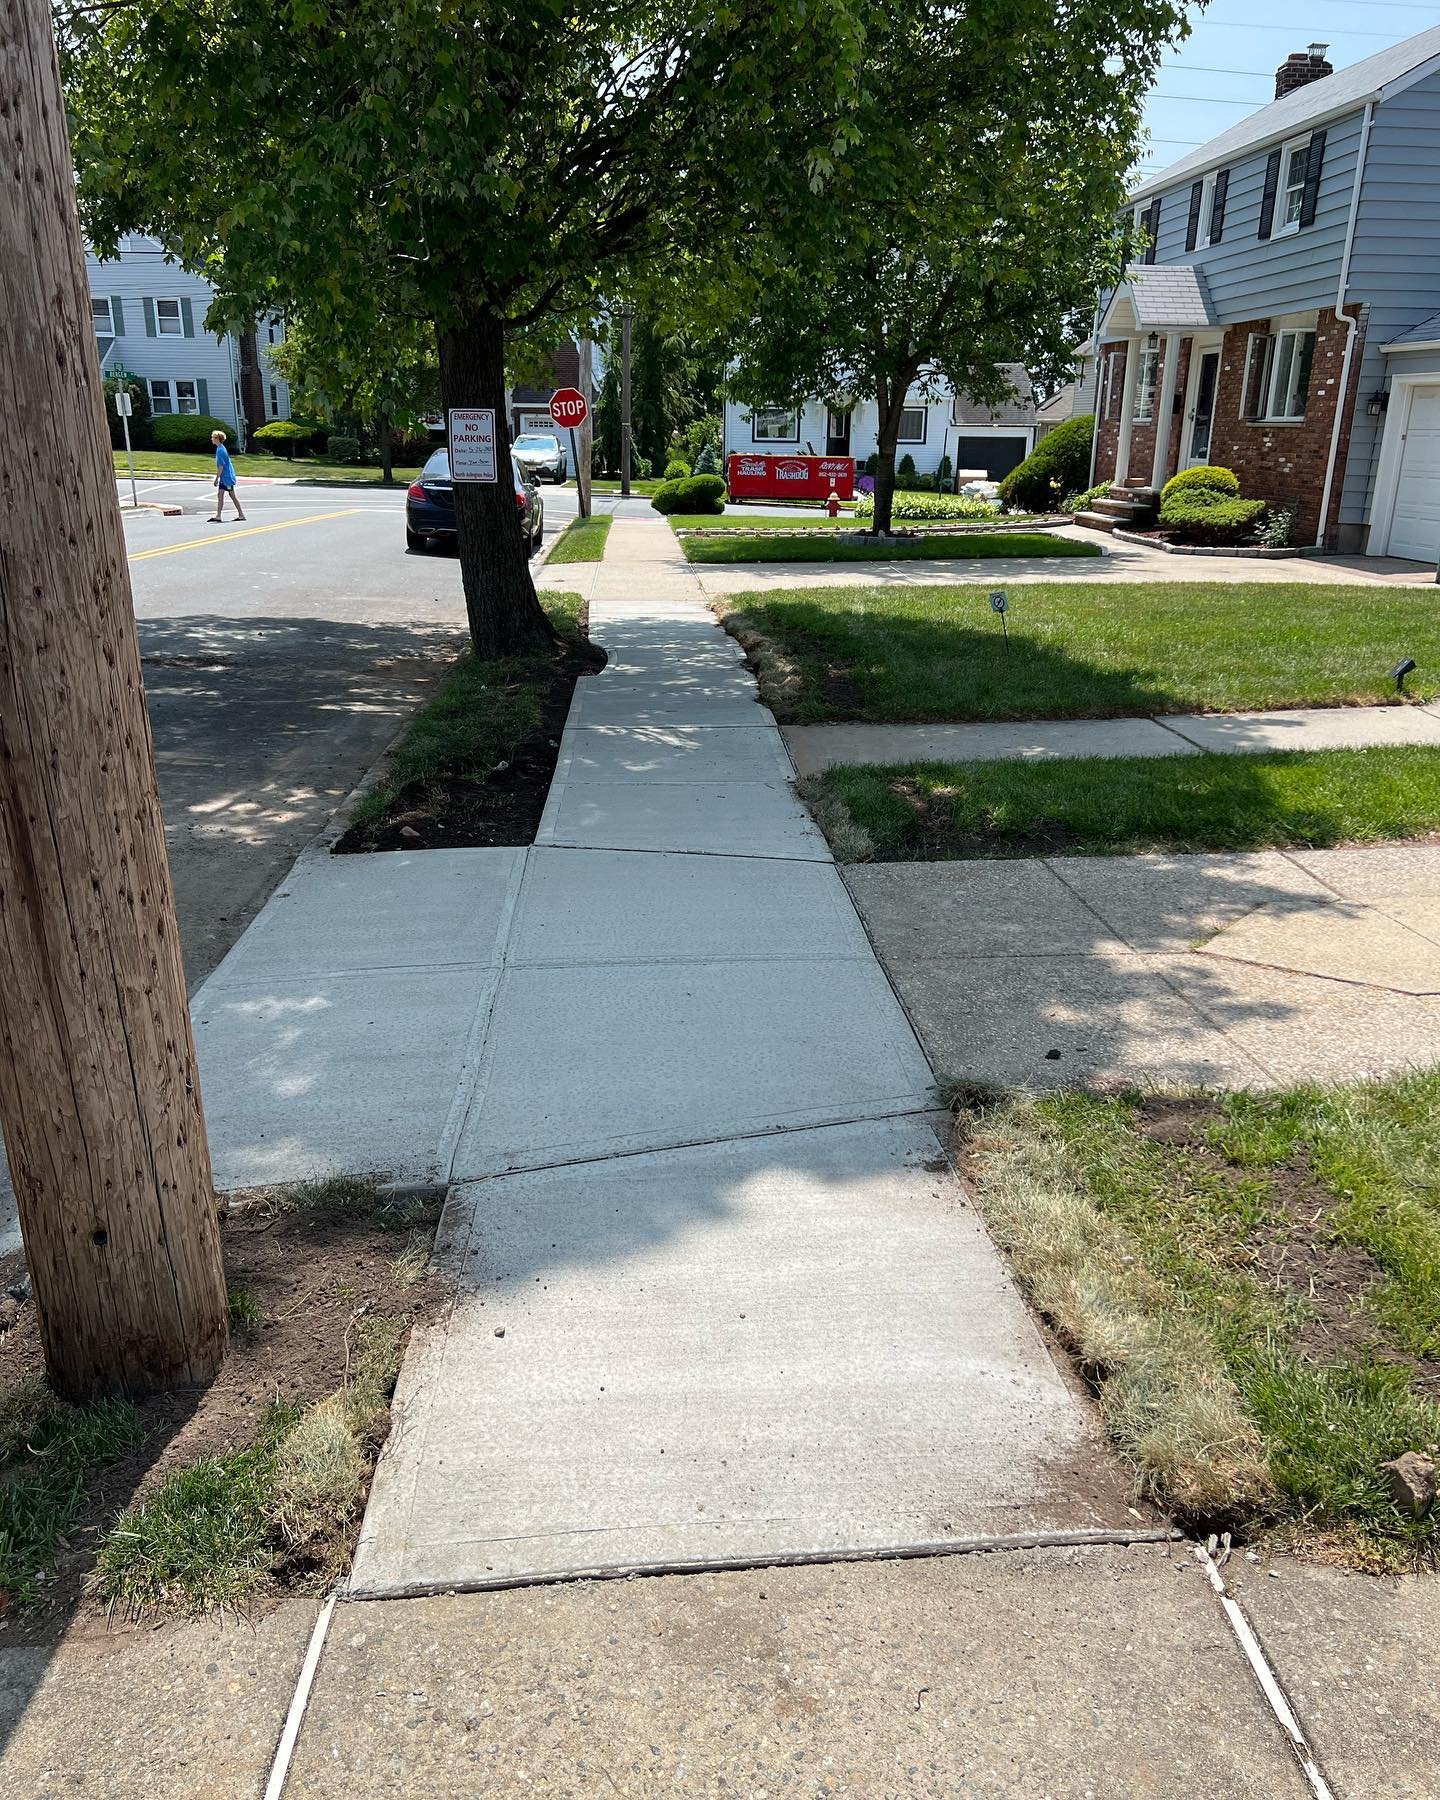 Tree stump grinding and sidewalk replacements for the Township of North Arlington!
 
Is your sidewalk damaged or lifted by a tree? Give us a call today for your free estimate at 201-390-8883.

#masonry #sidewalk #concrete #landscapeconstruction #outd